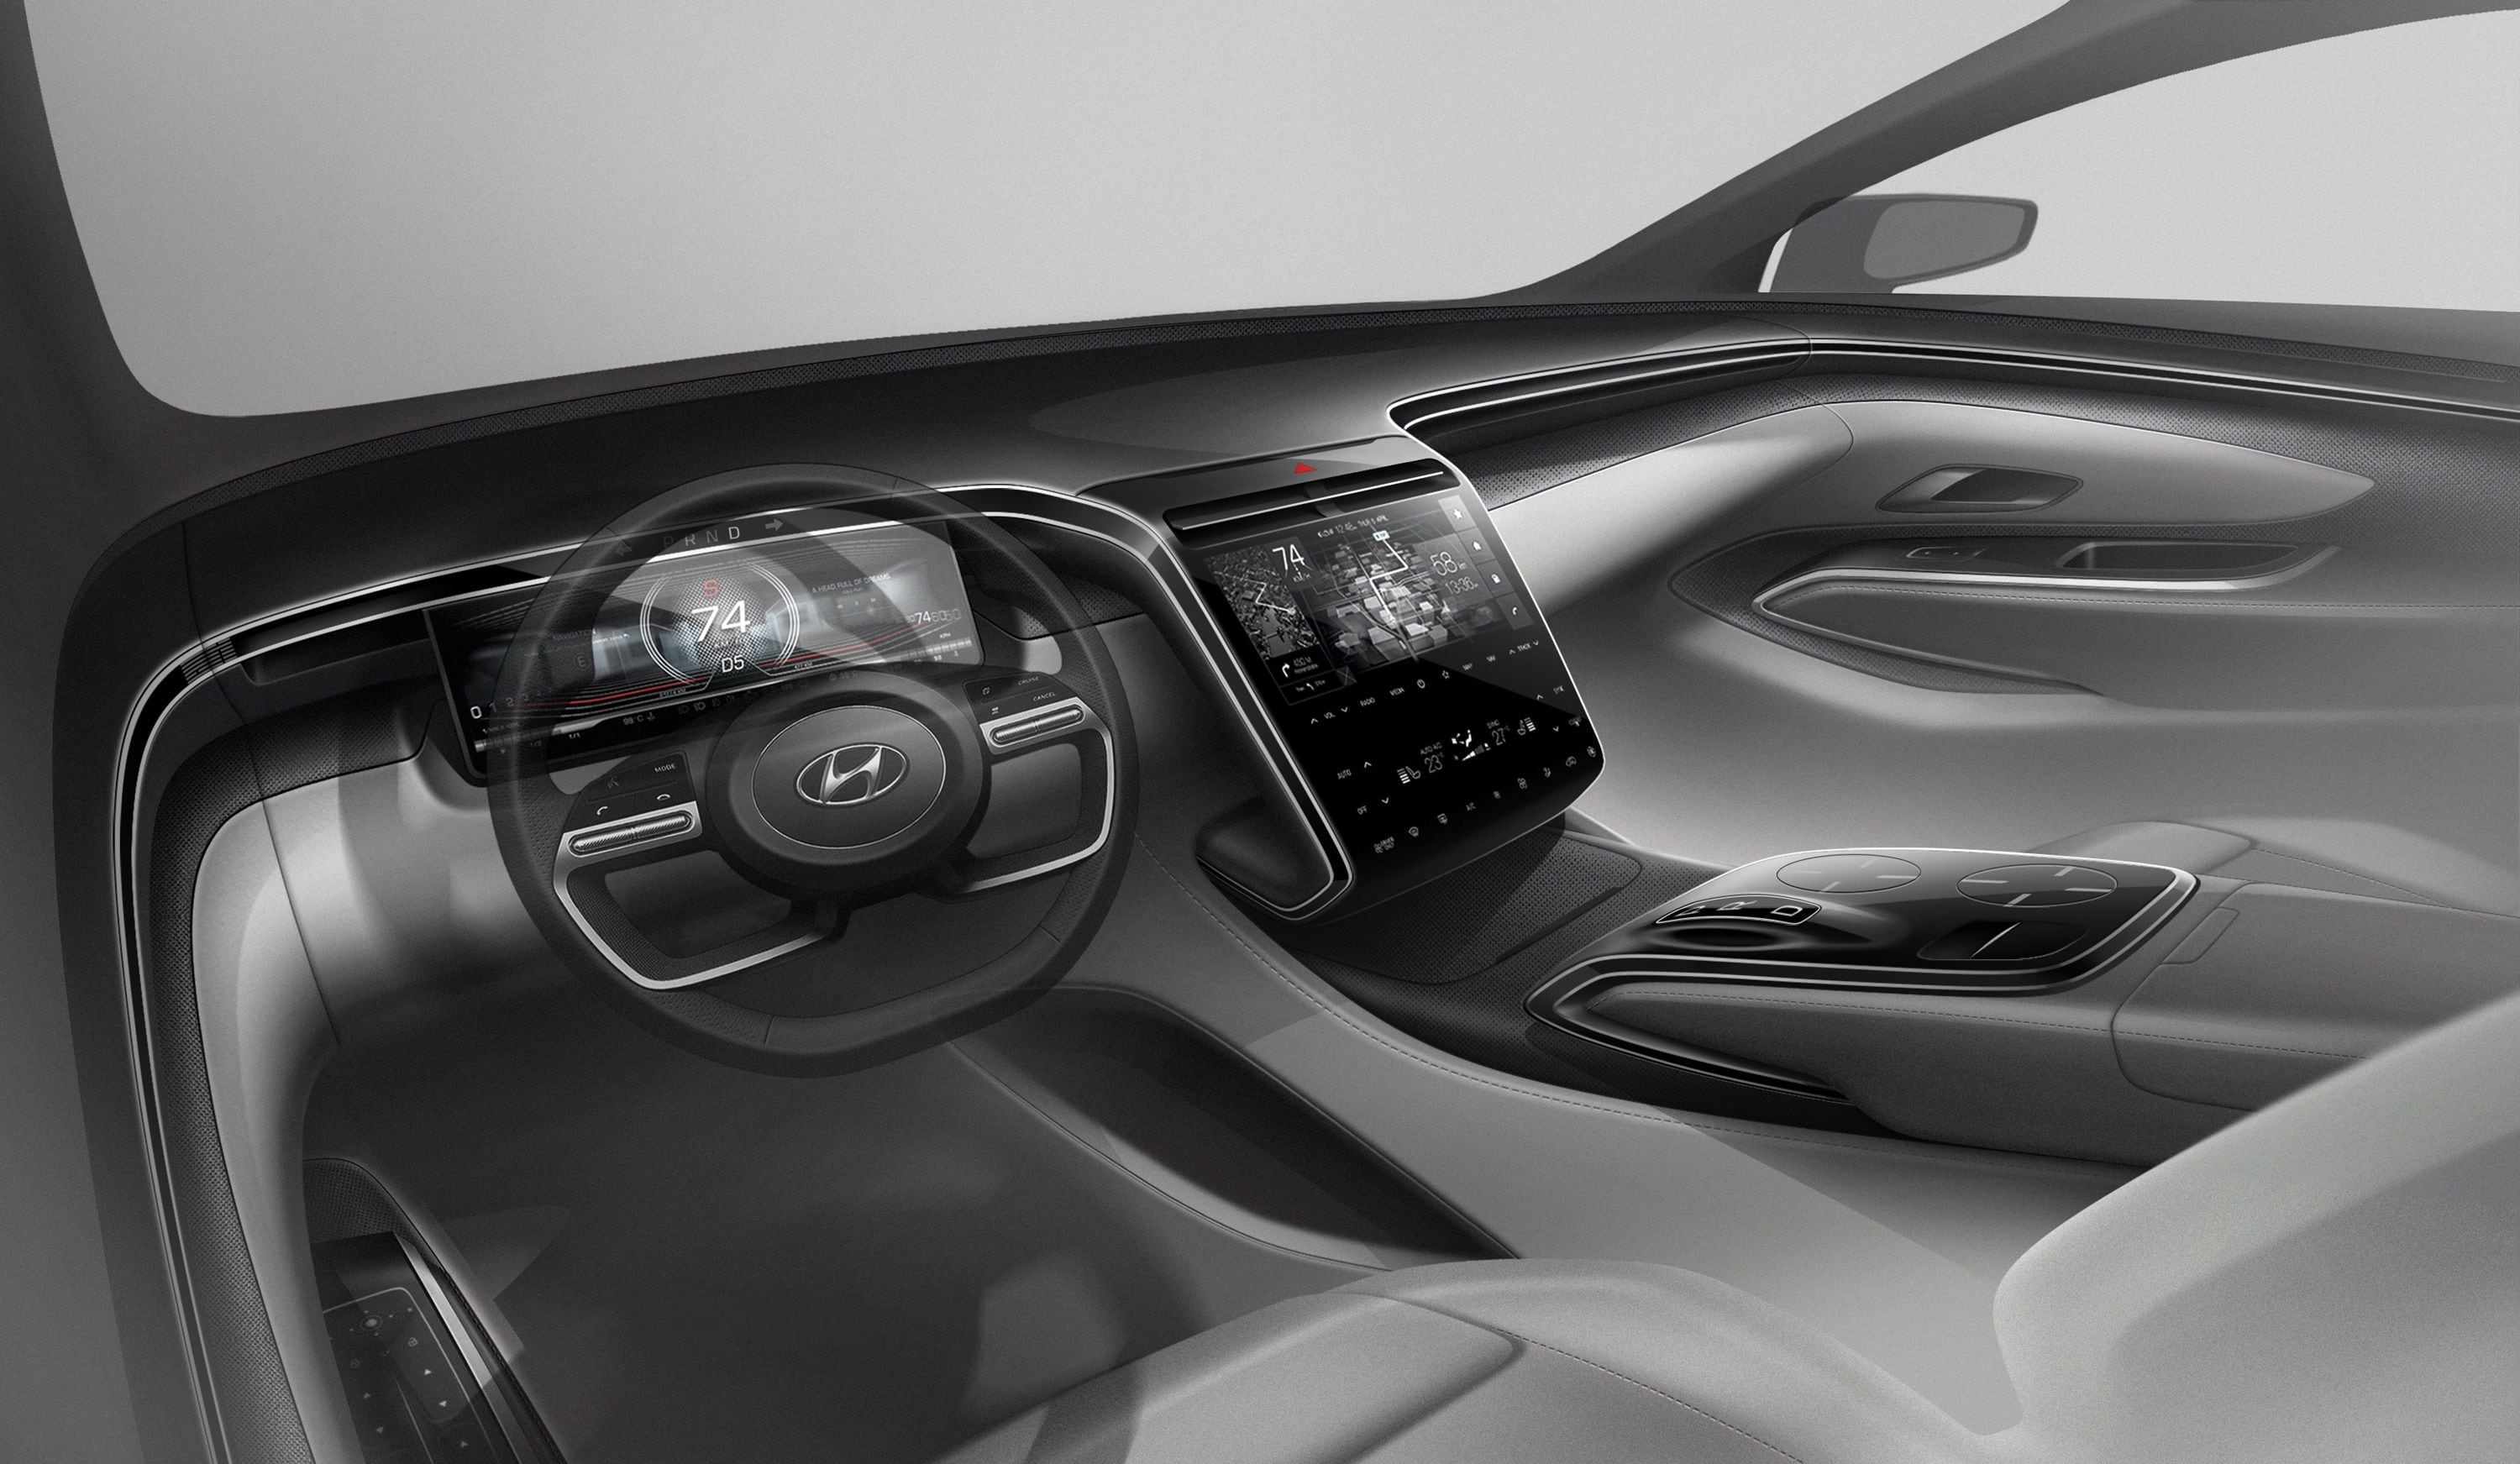 The cabin of Tucson 2021 seeks to up the tech and comfort quotient in the SUV.